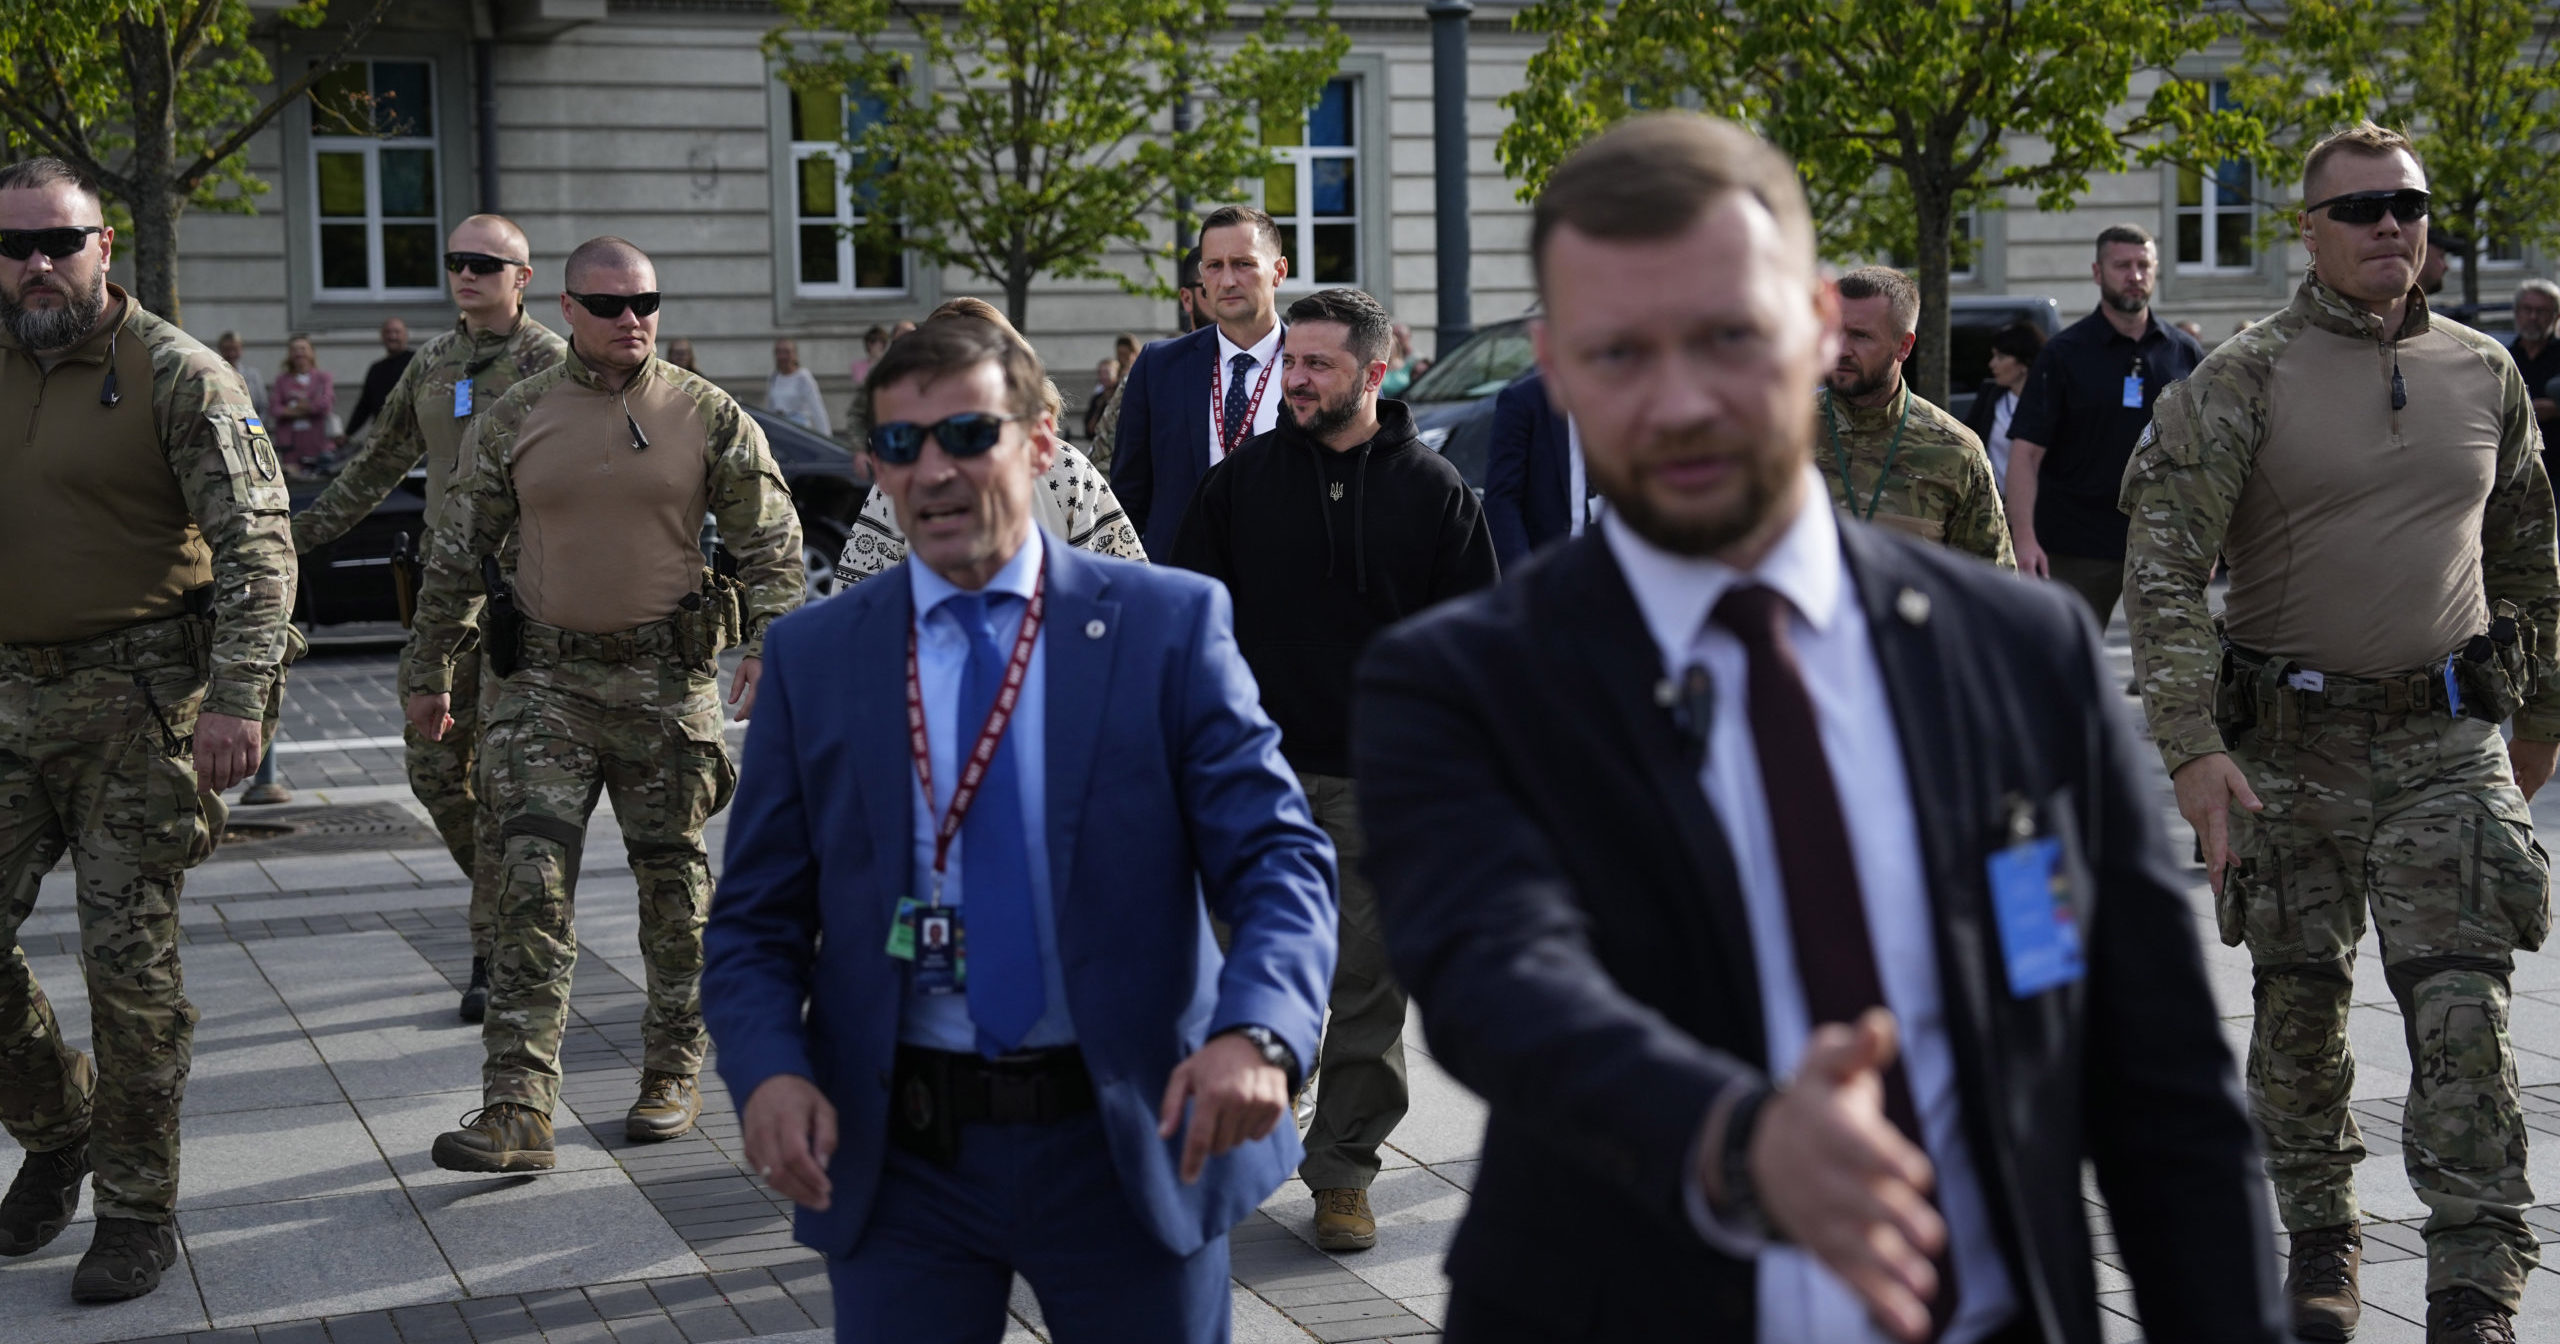 Ukraine President Volodymyr Zelenskyy, center, arrives for an event on the sidelines of a NATO summit in Vilnius, Lithuania, on Tuesday.